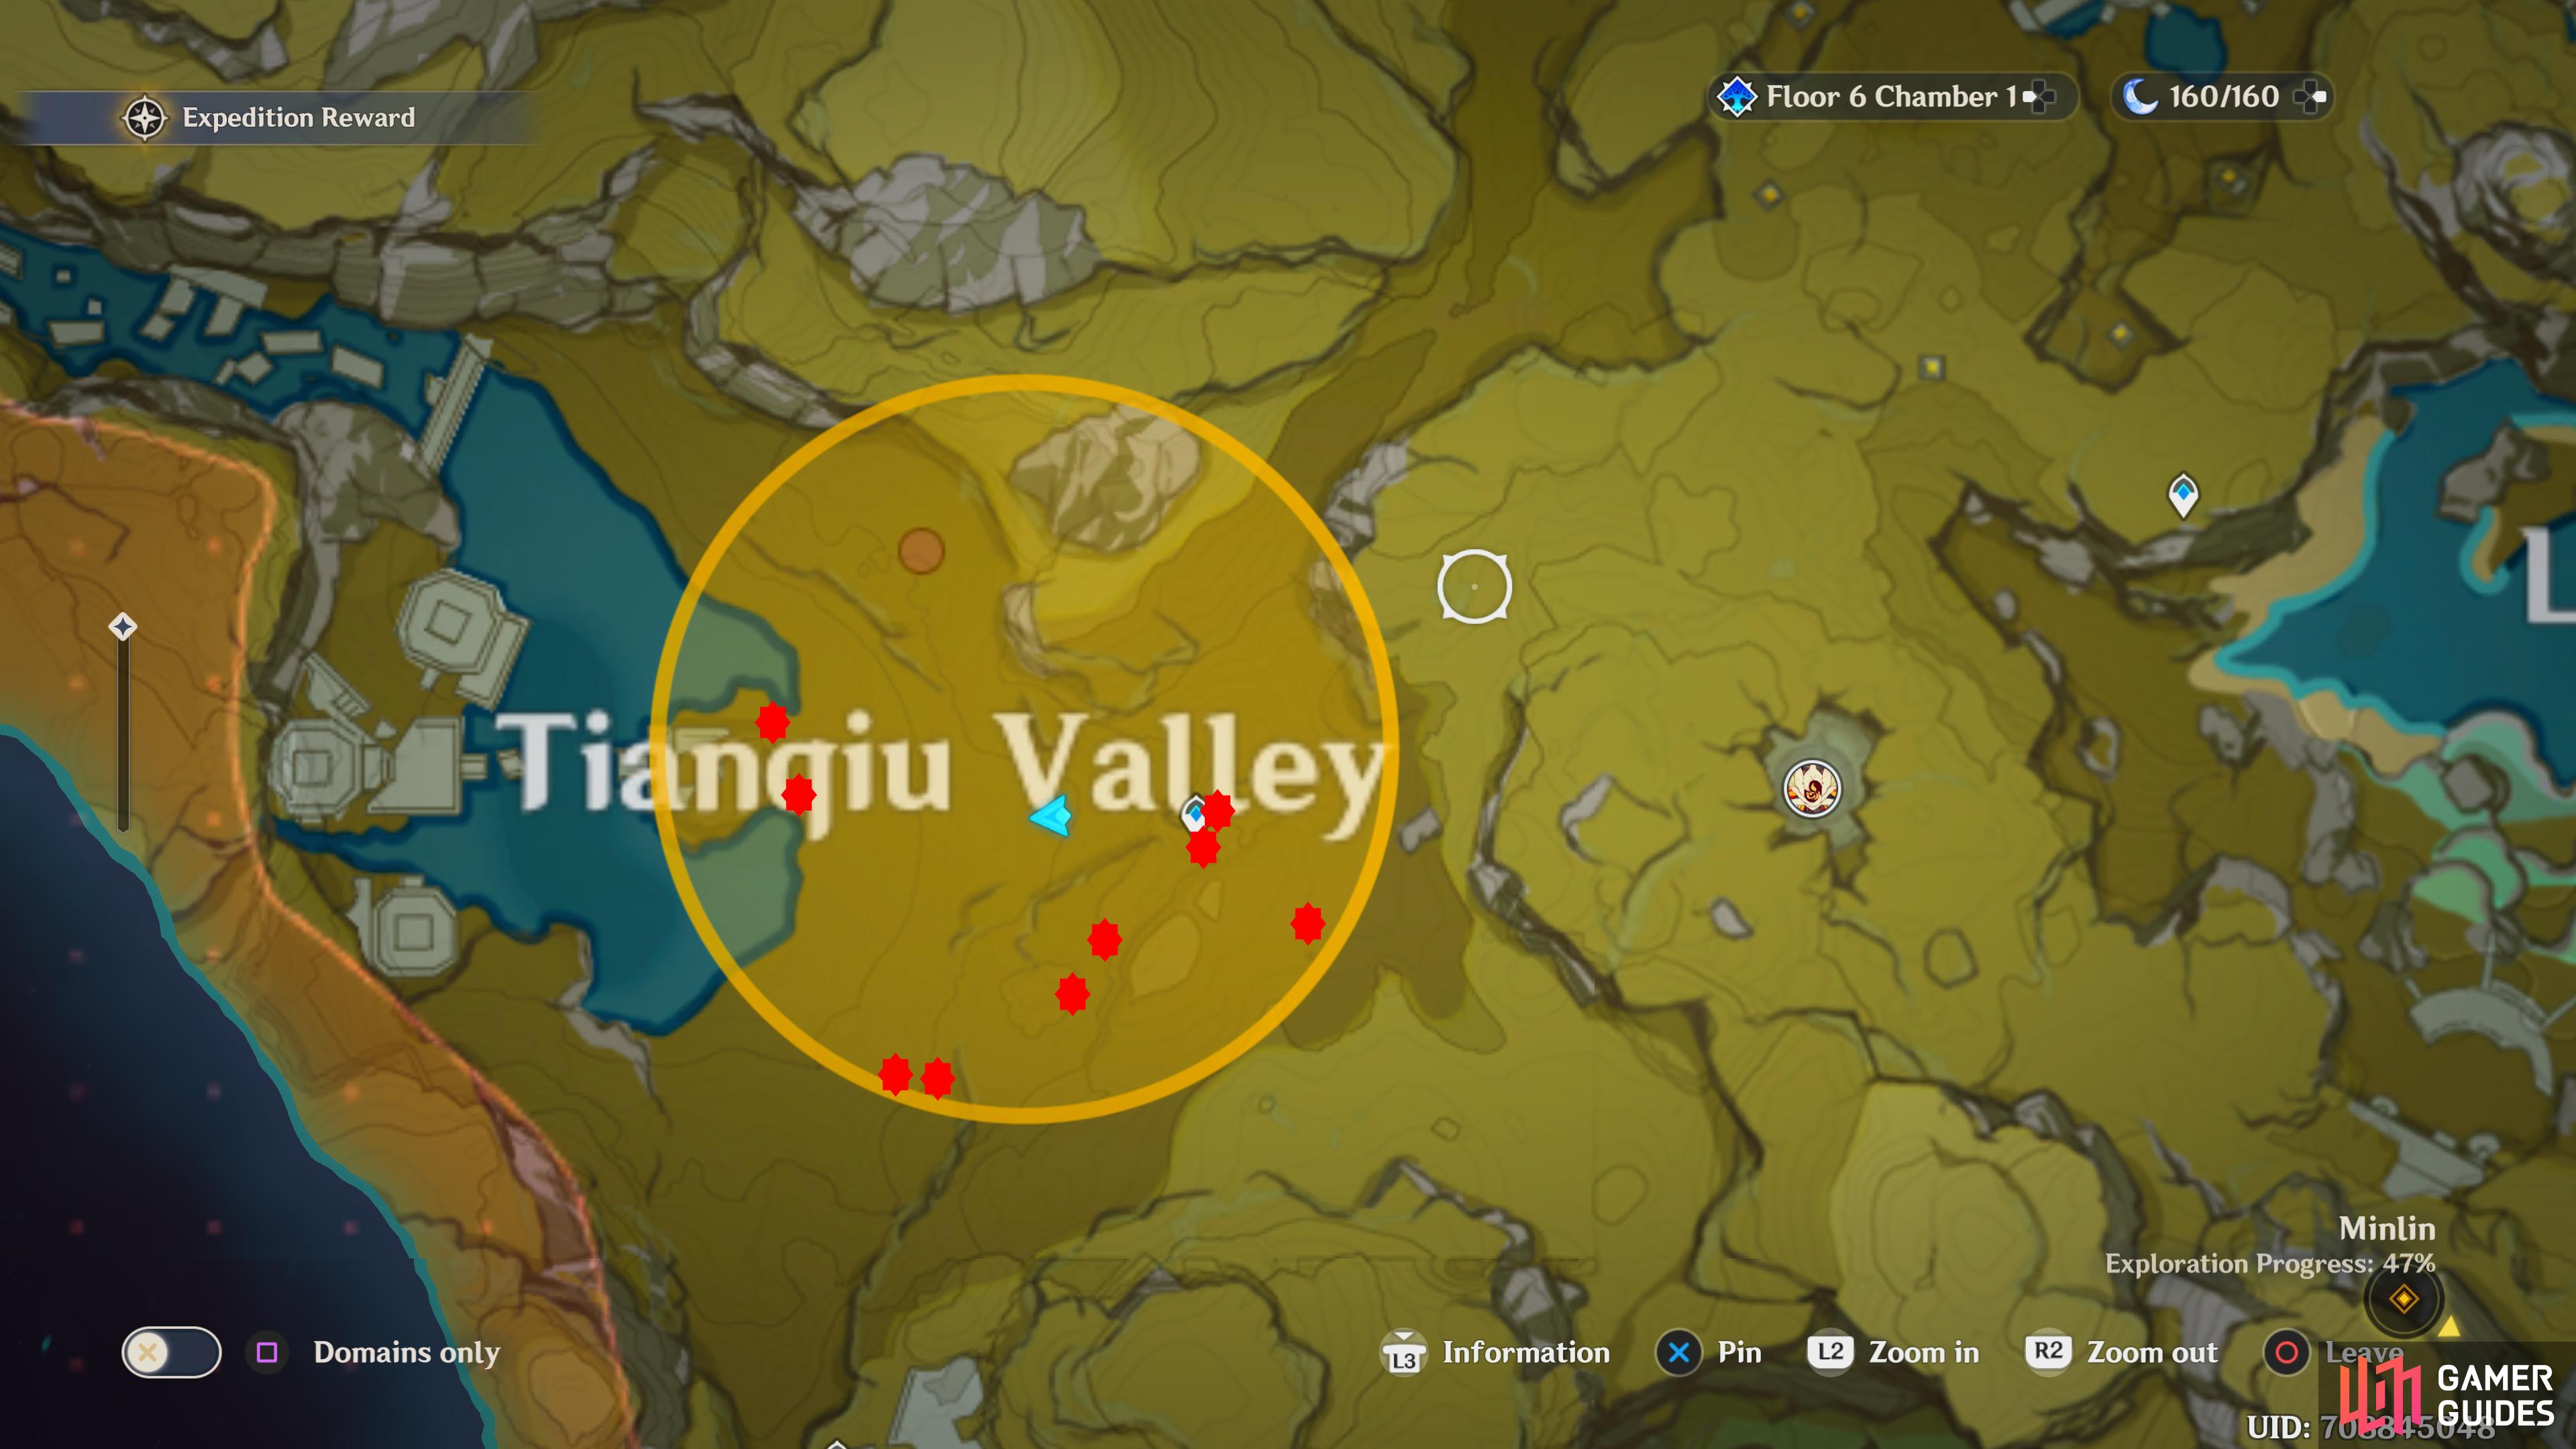 The Treasures can be found where the red dots are on this map.